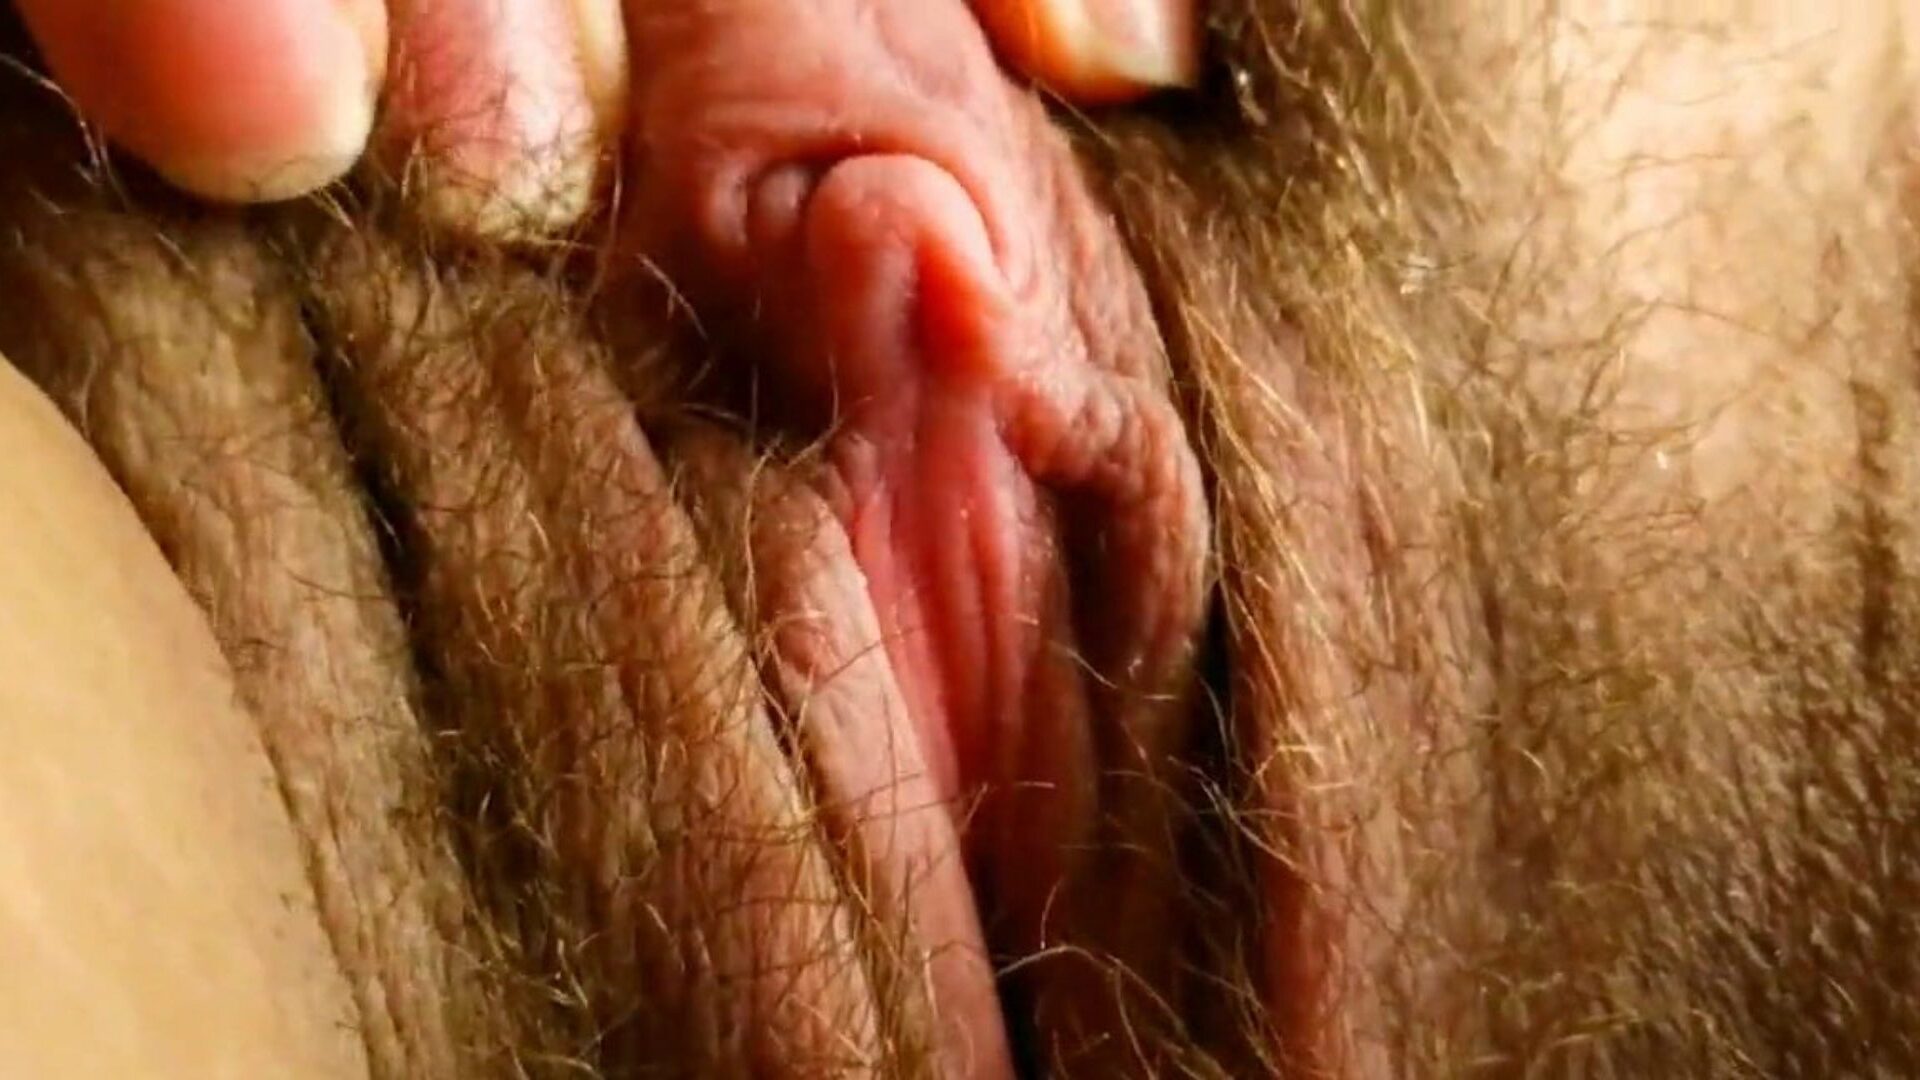 acesta este cel mai sexy clitoris mare pe care l-ai văzut vreodată: hd porn af watch this is the sexiest big clit you have ever seen clip on xhamster - the ultimate collection of free-for-all brazilian hairy hd hard-core pornography tube videos